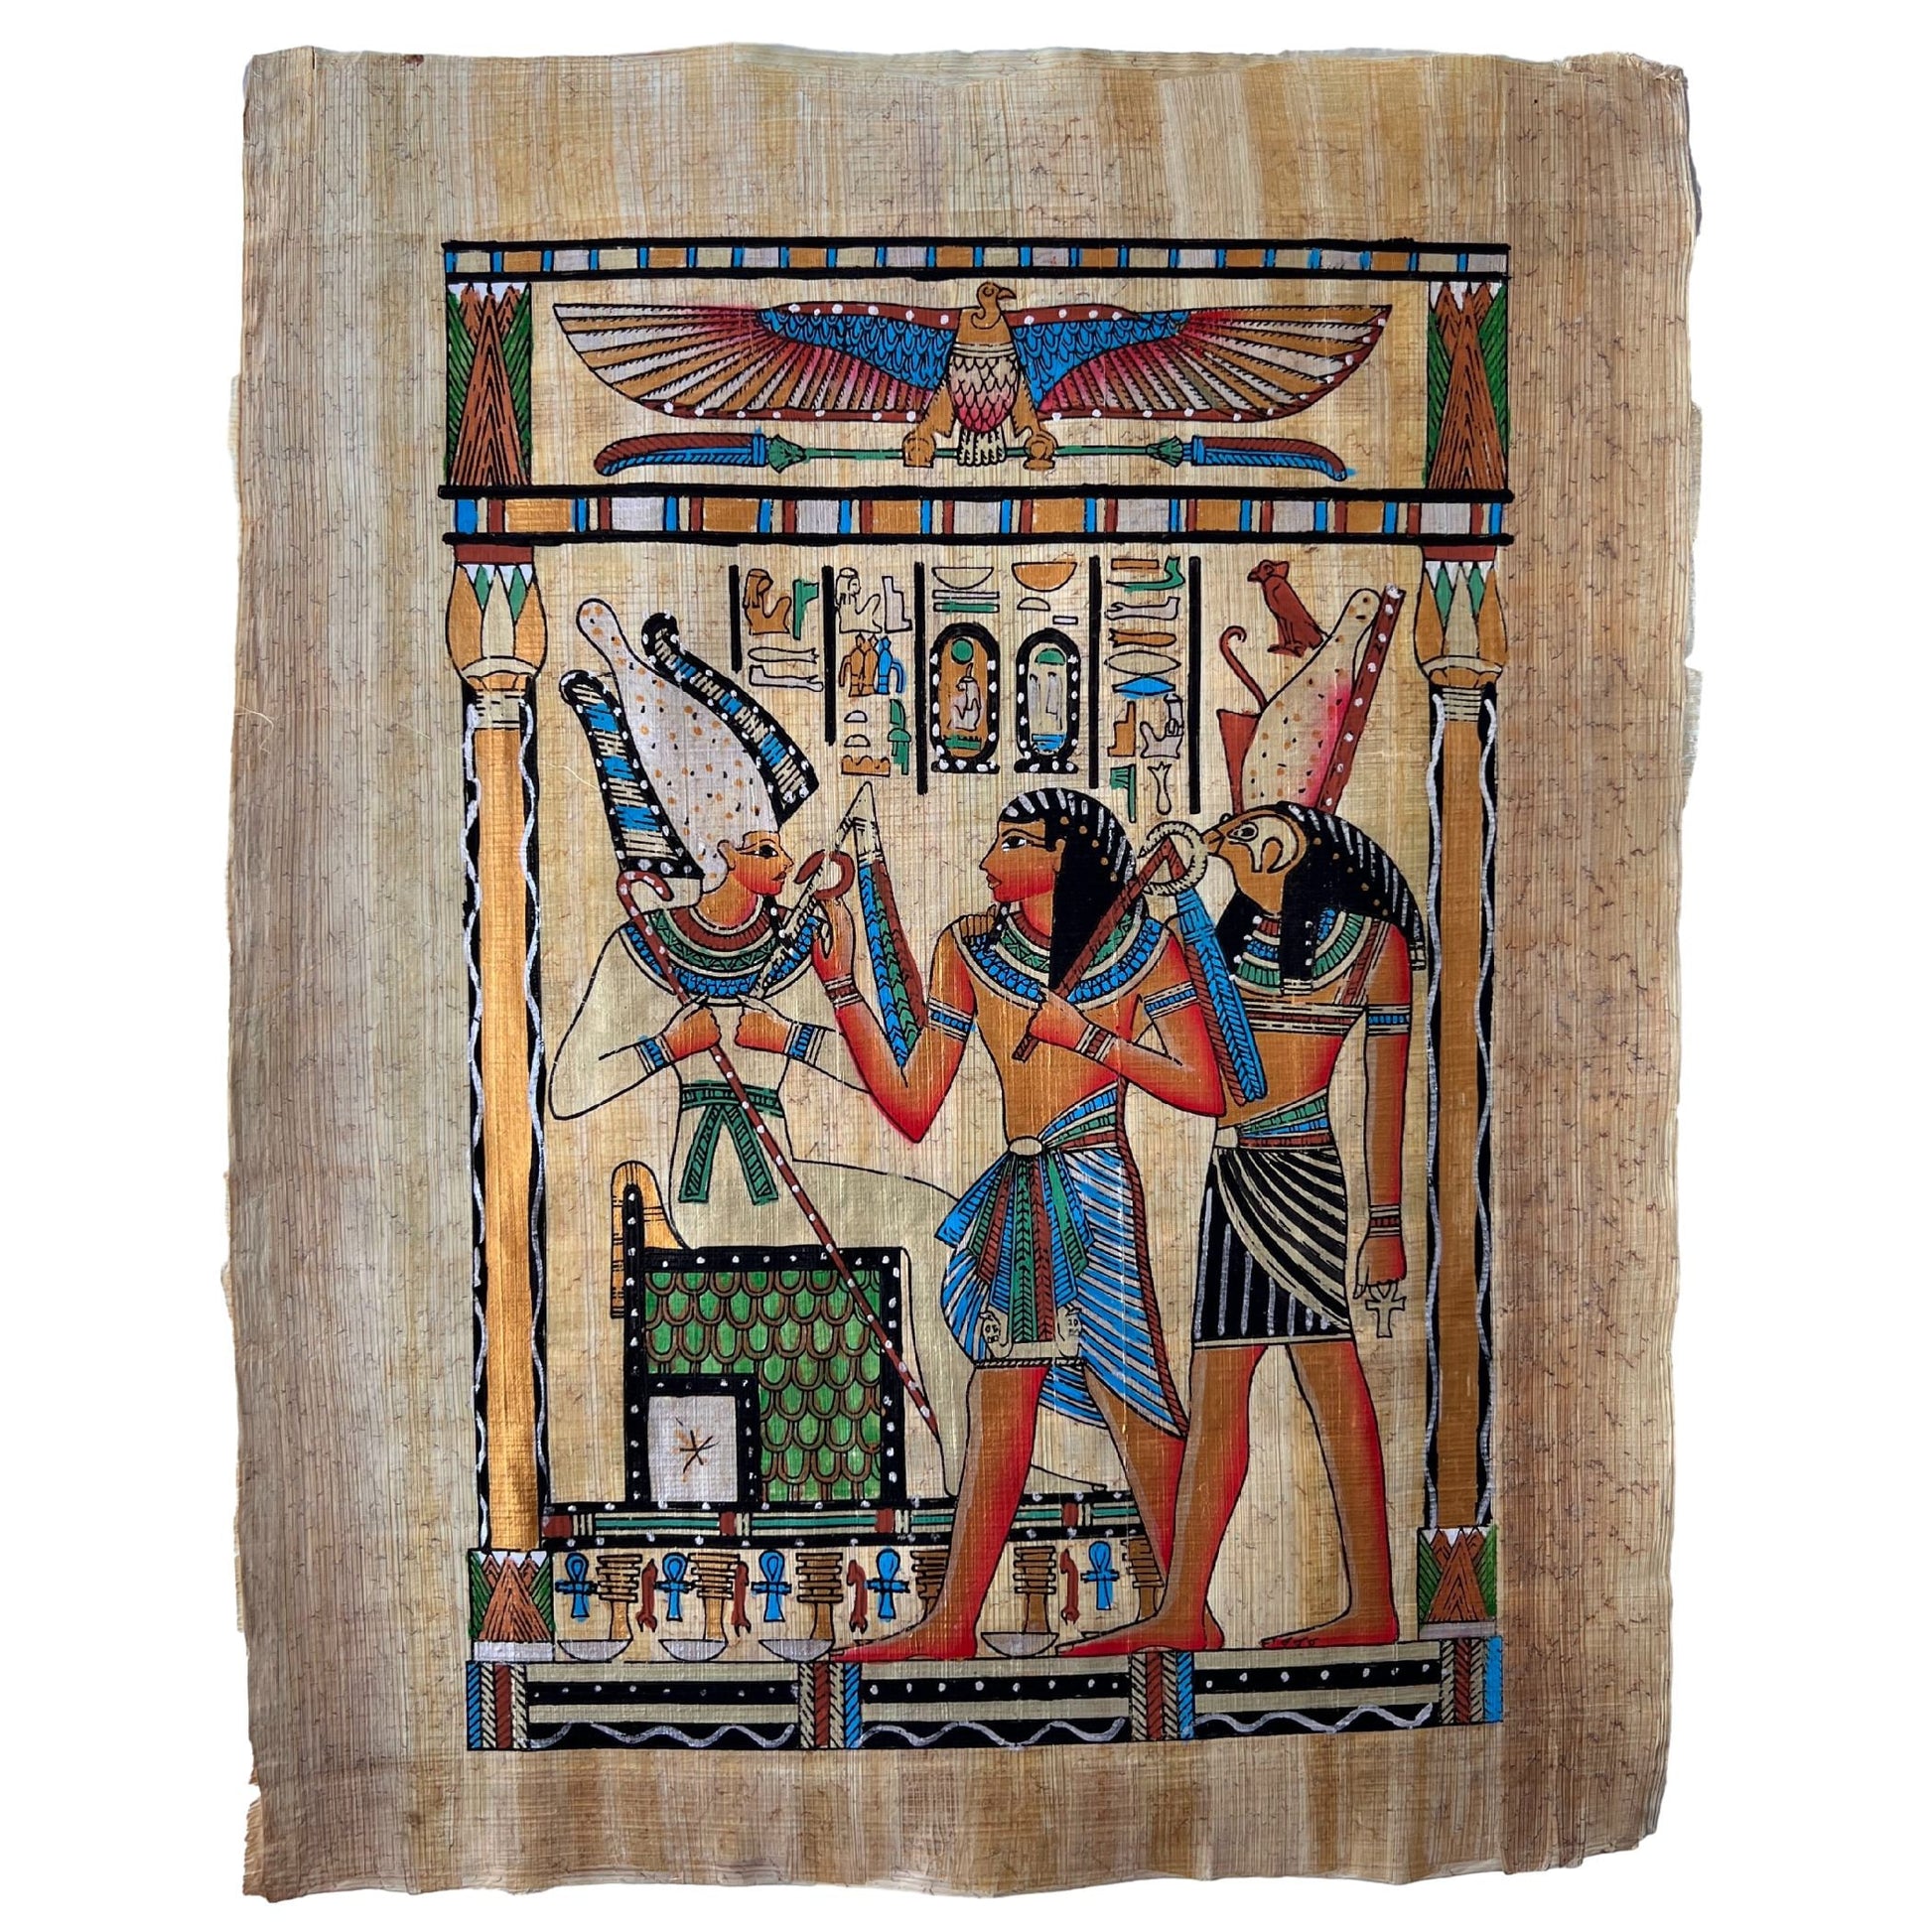 Osiris Lord of Gods, Pharaoh and God Horus Ancient Egyptian Genuine Hand Painted Papyrus Painting Art